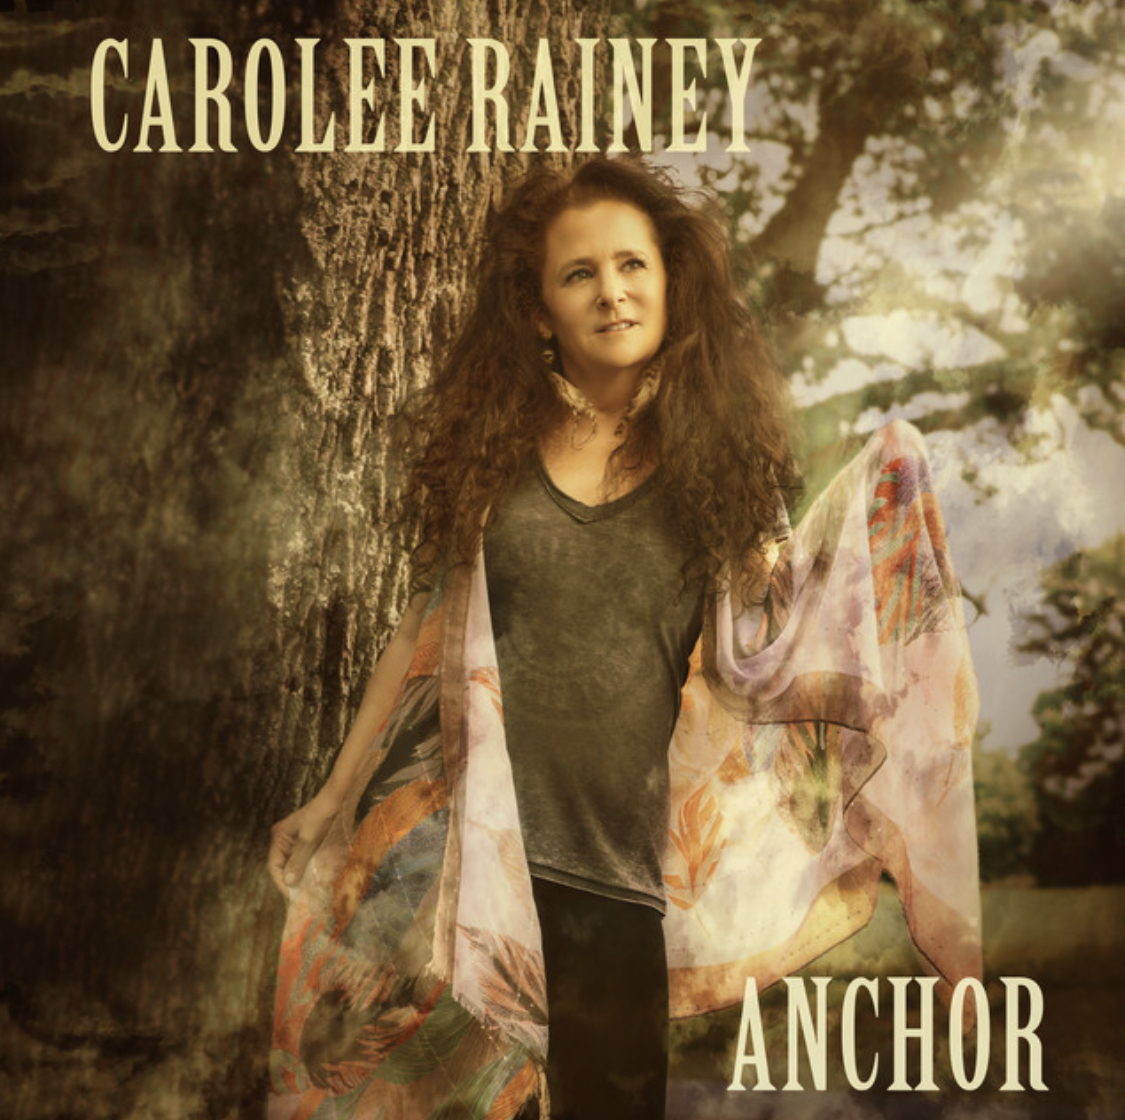 Carolee Rainey’s song ‘ANCHOR’ deeply speaks to anyone who’s ever felt abandoned. After such an occurrence it can truly feel paralyzing to carry on with life.